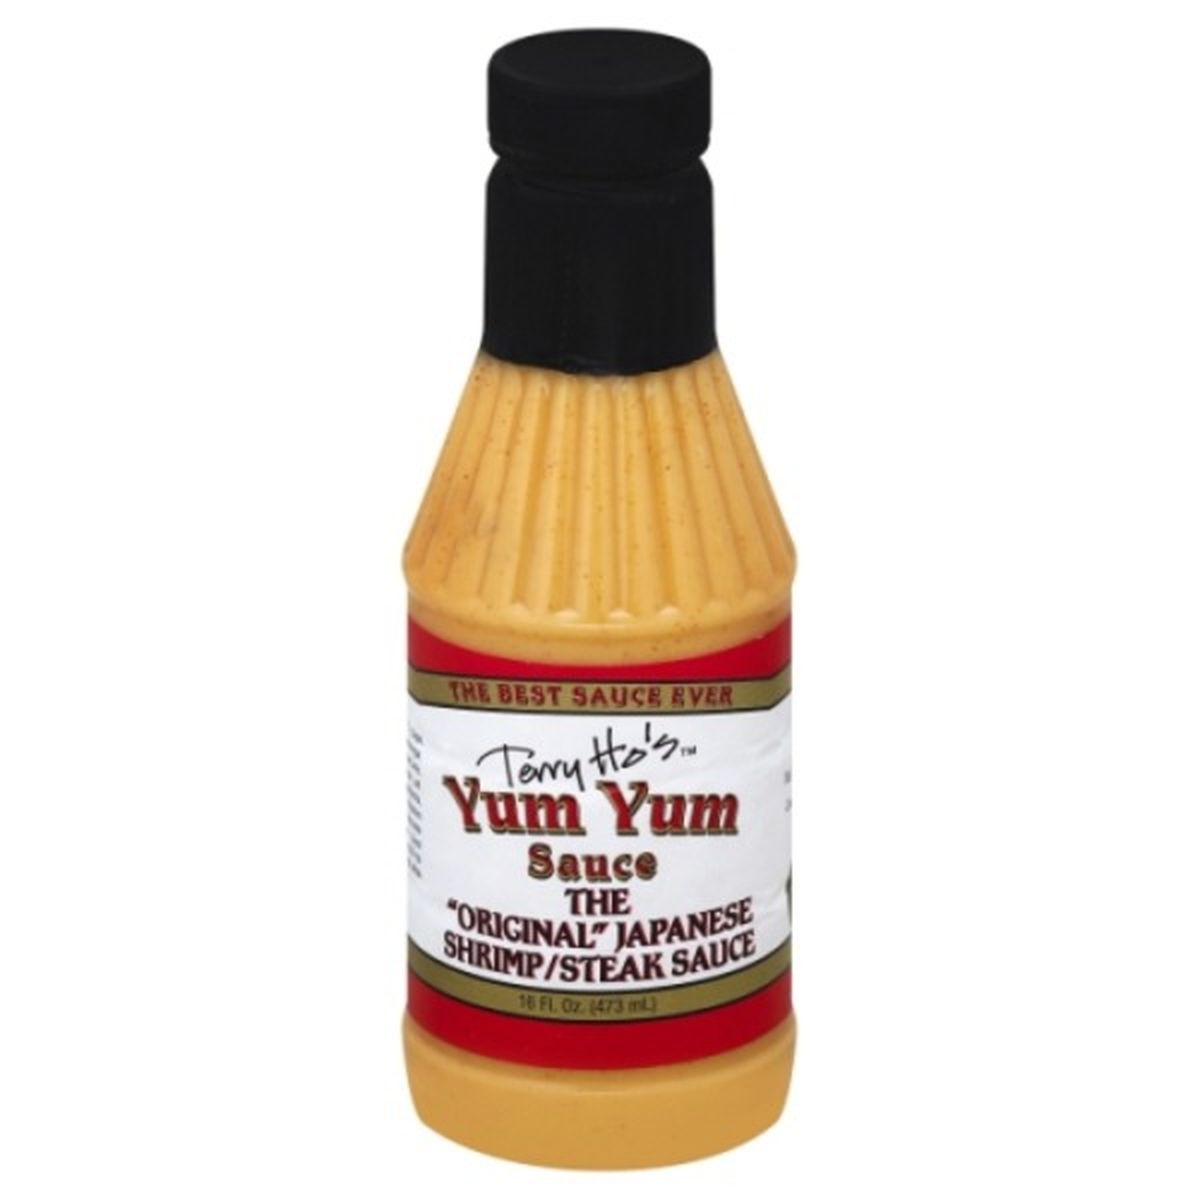 Calories in Terry Ho's Yum Yum Sauce